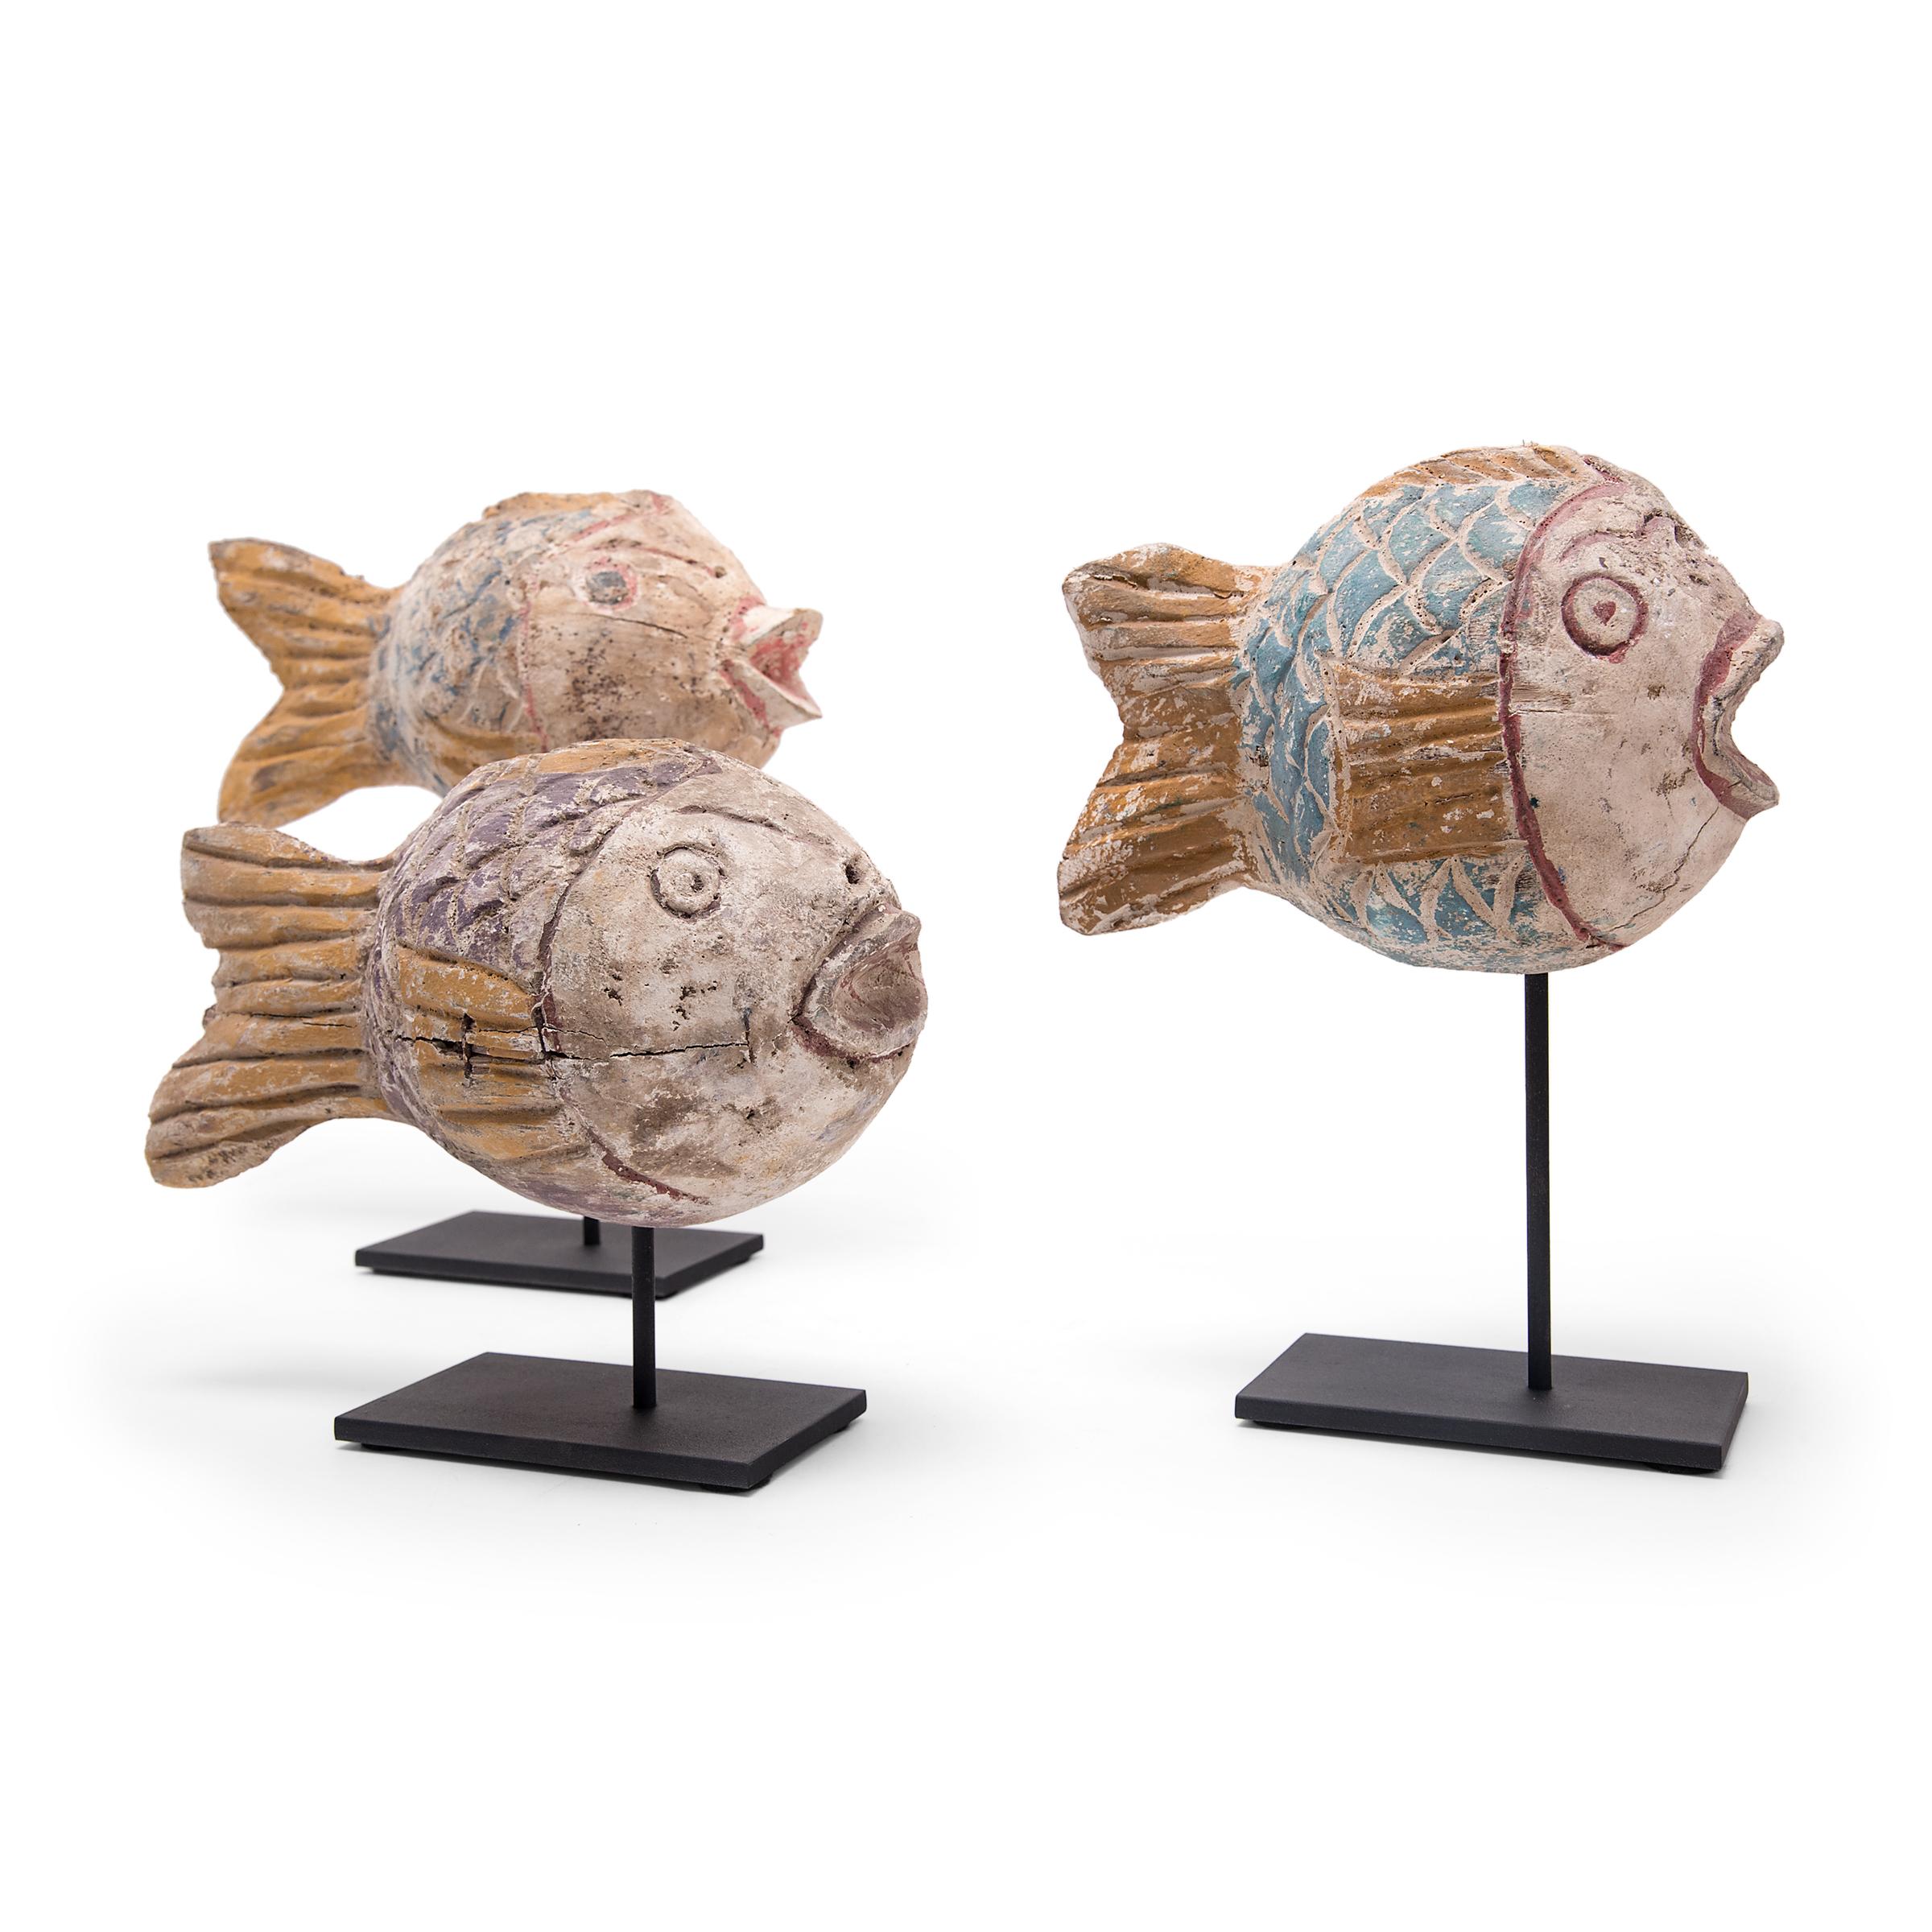 Hand-carved from reclaimed wood, these rustic koi sculptures recreate early 20th-century Chinese Folk Art designs. Each fish is carved with a squat, rounded body and painted with a colorful palette of blues, purples, and yellows. Common motifs in